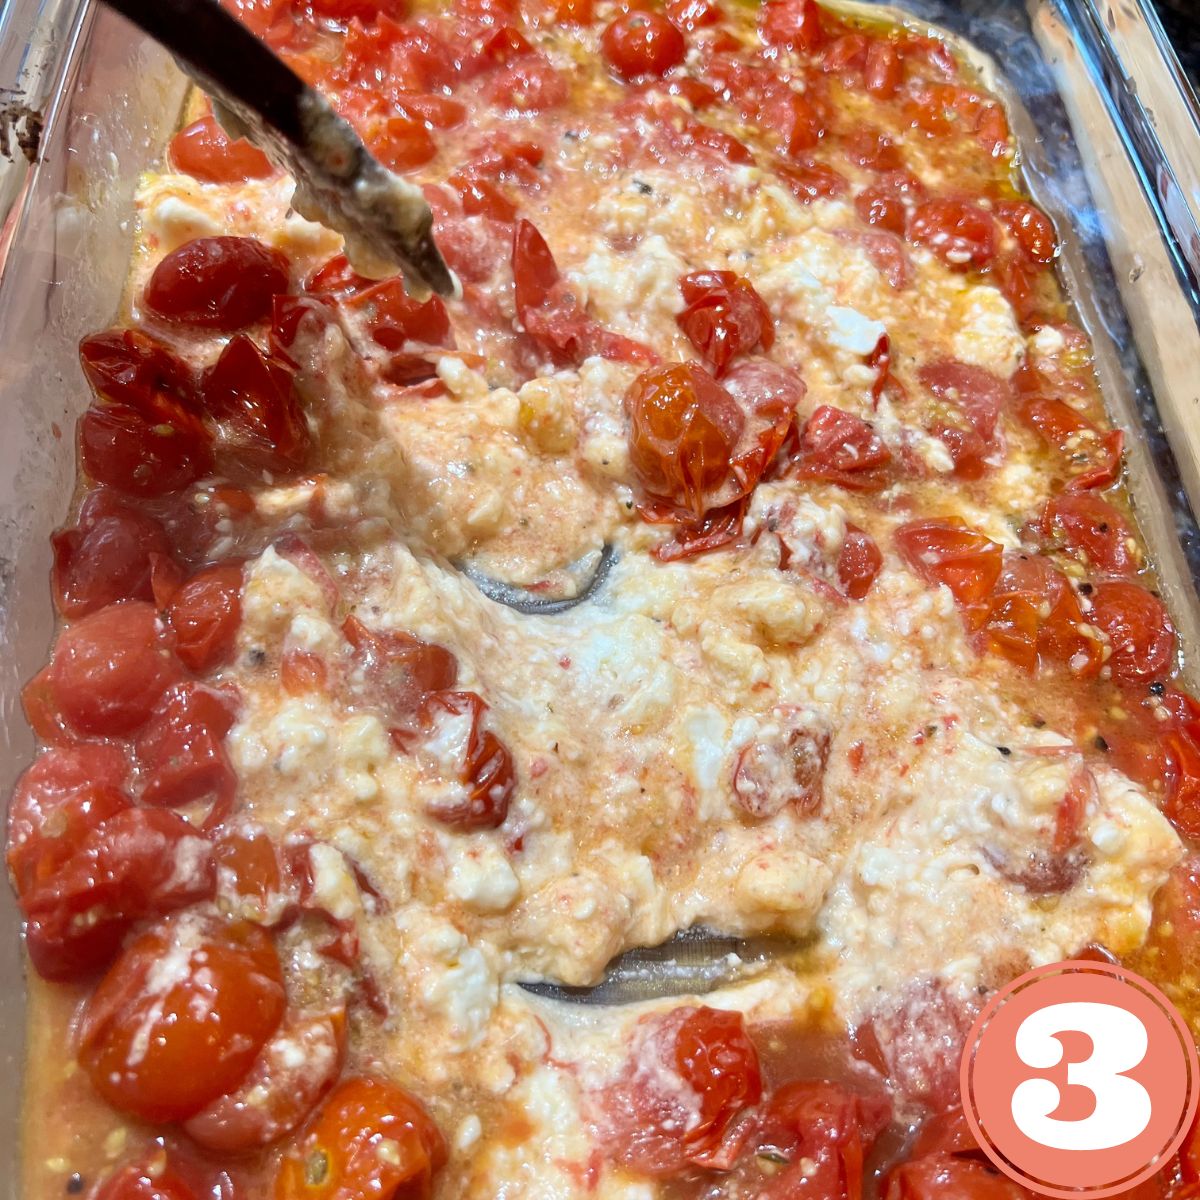 Cherry tomatoes and feta cheese being mixed together in a baking pan